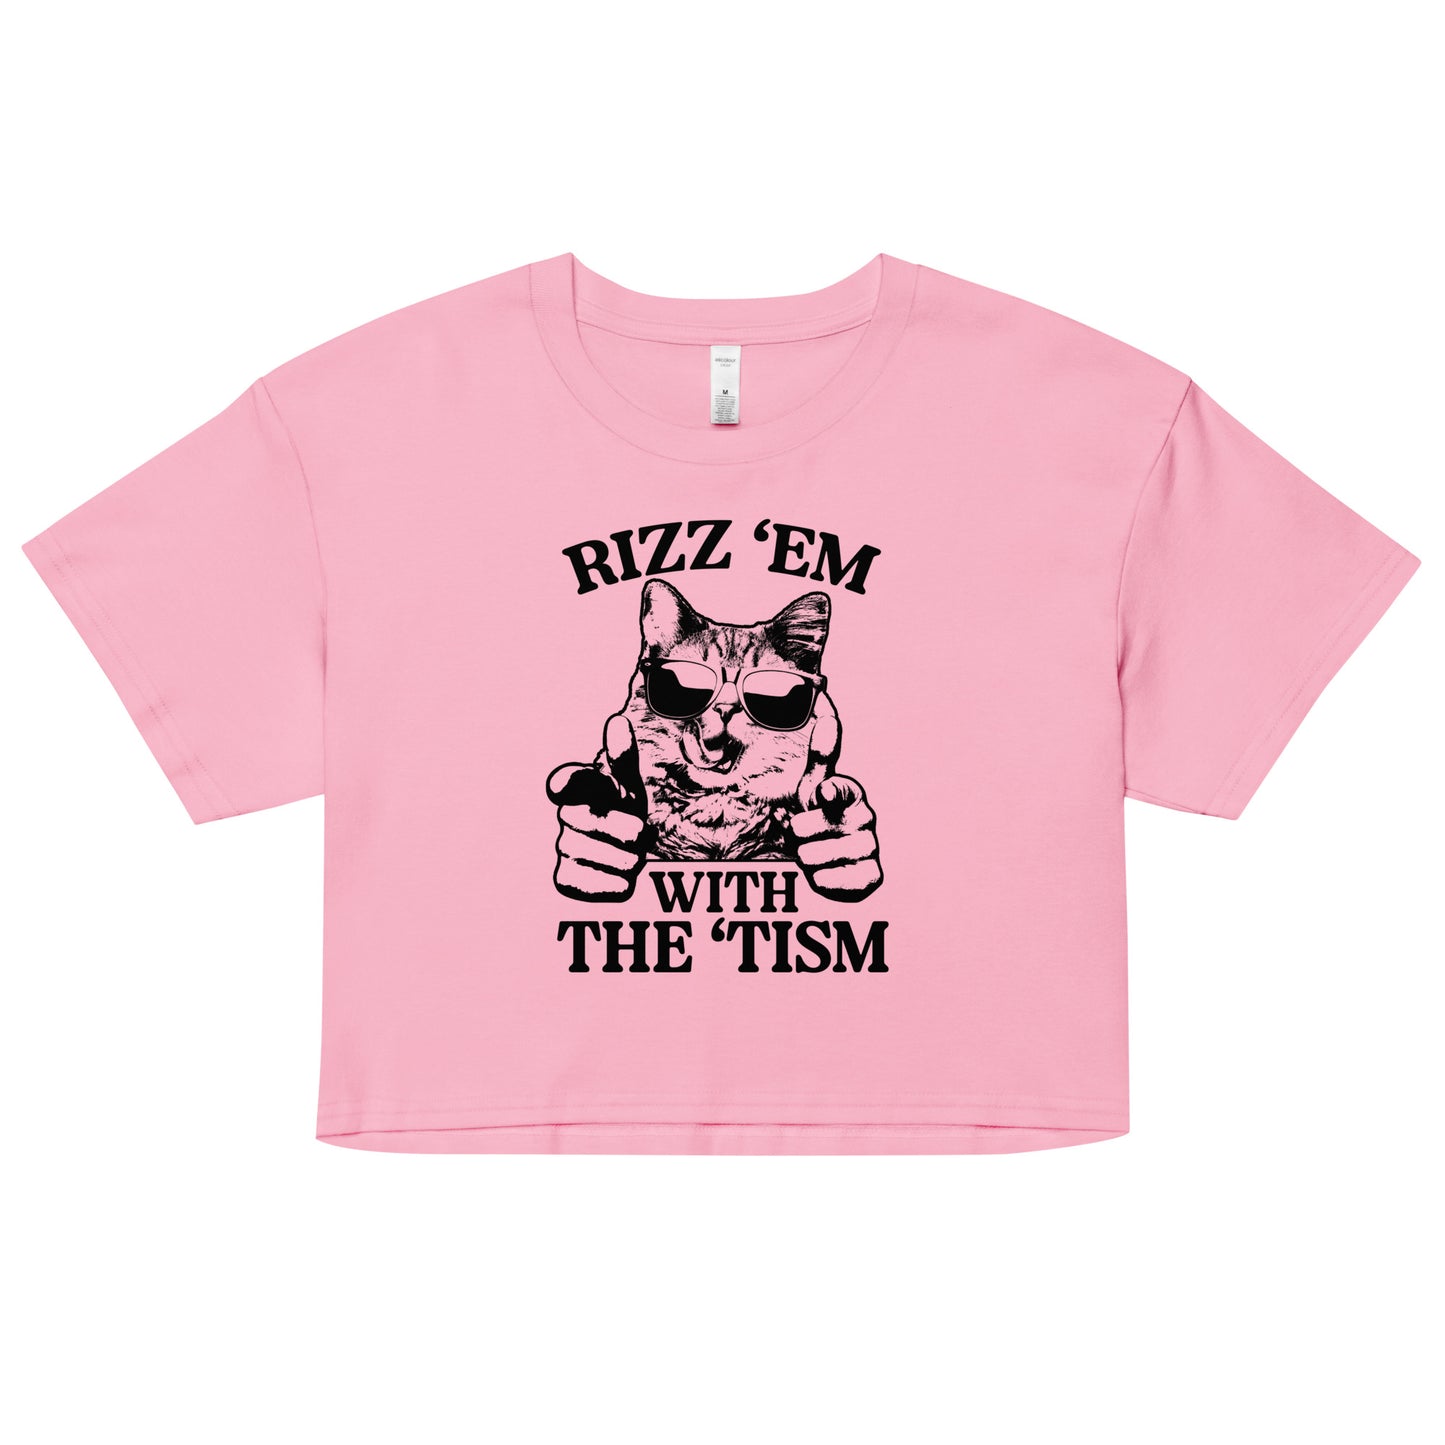 Rizz 'Em With the 'Tism (Cat) crop top